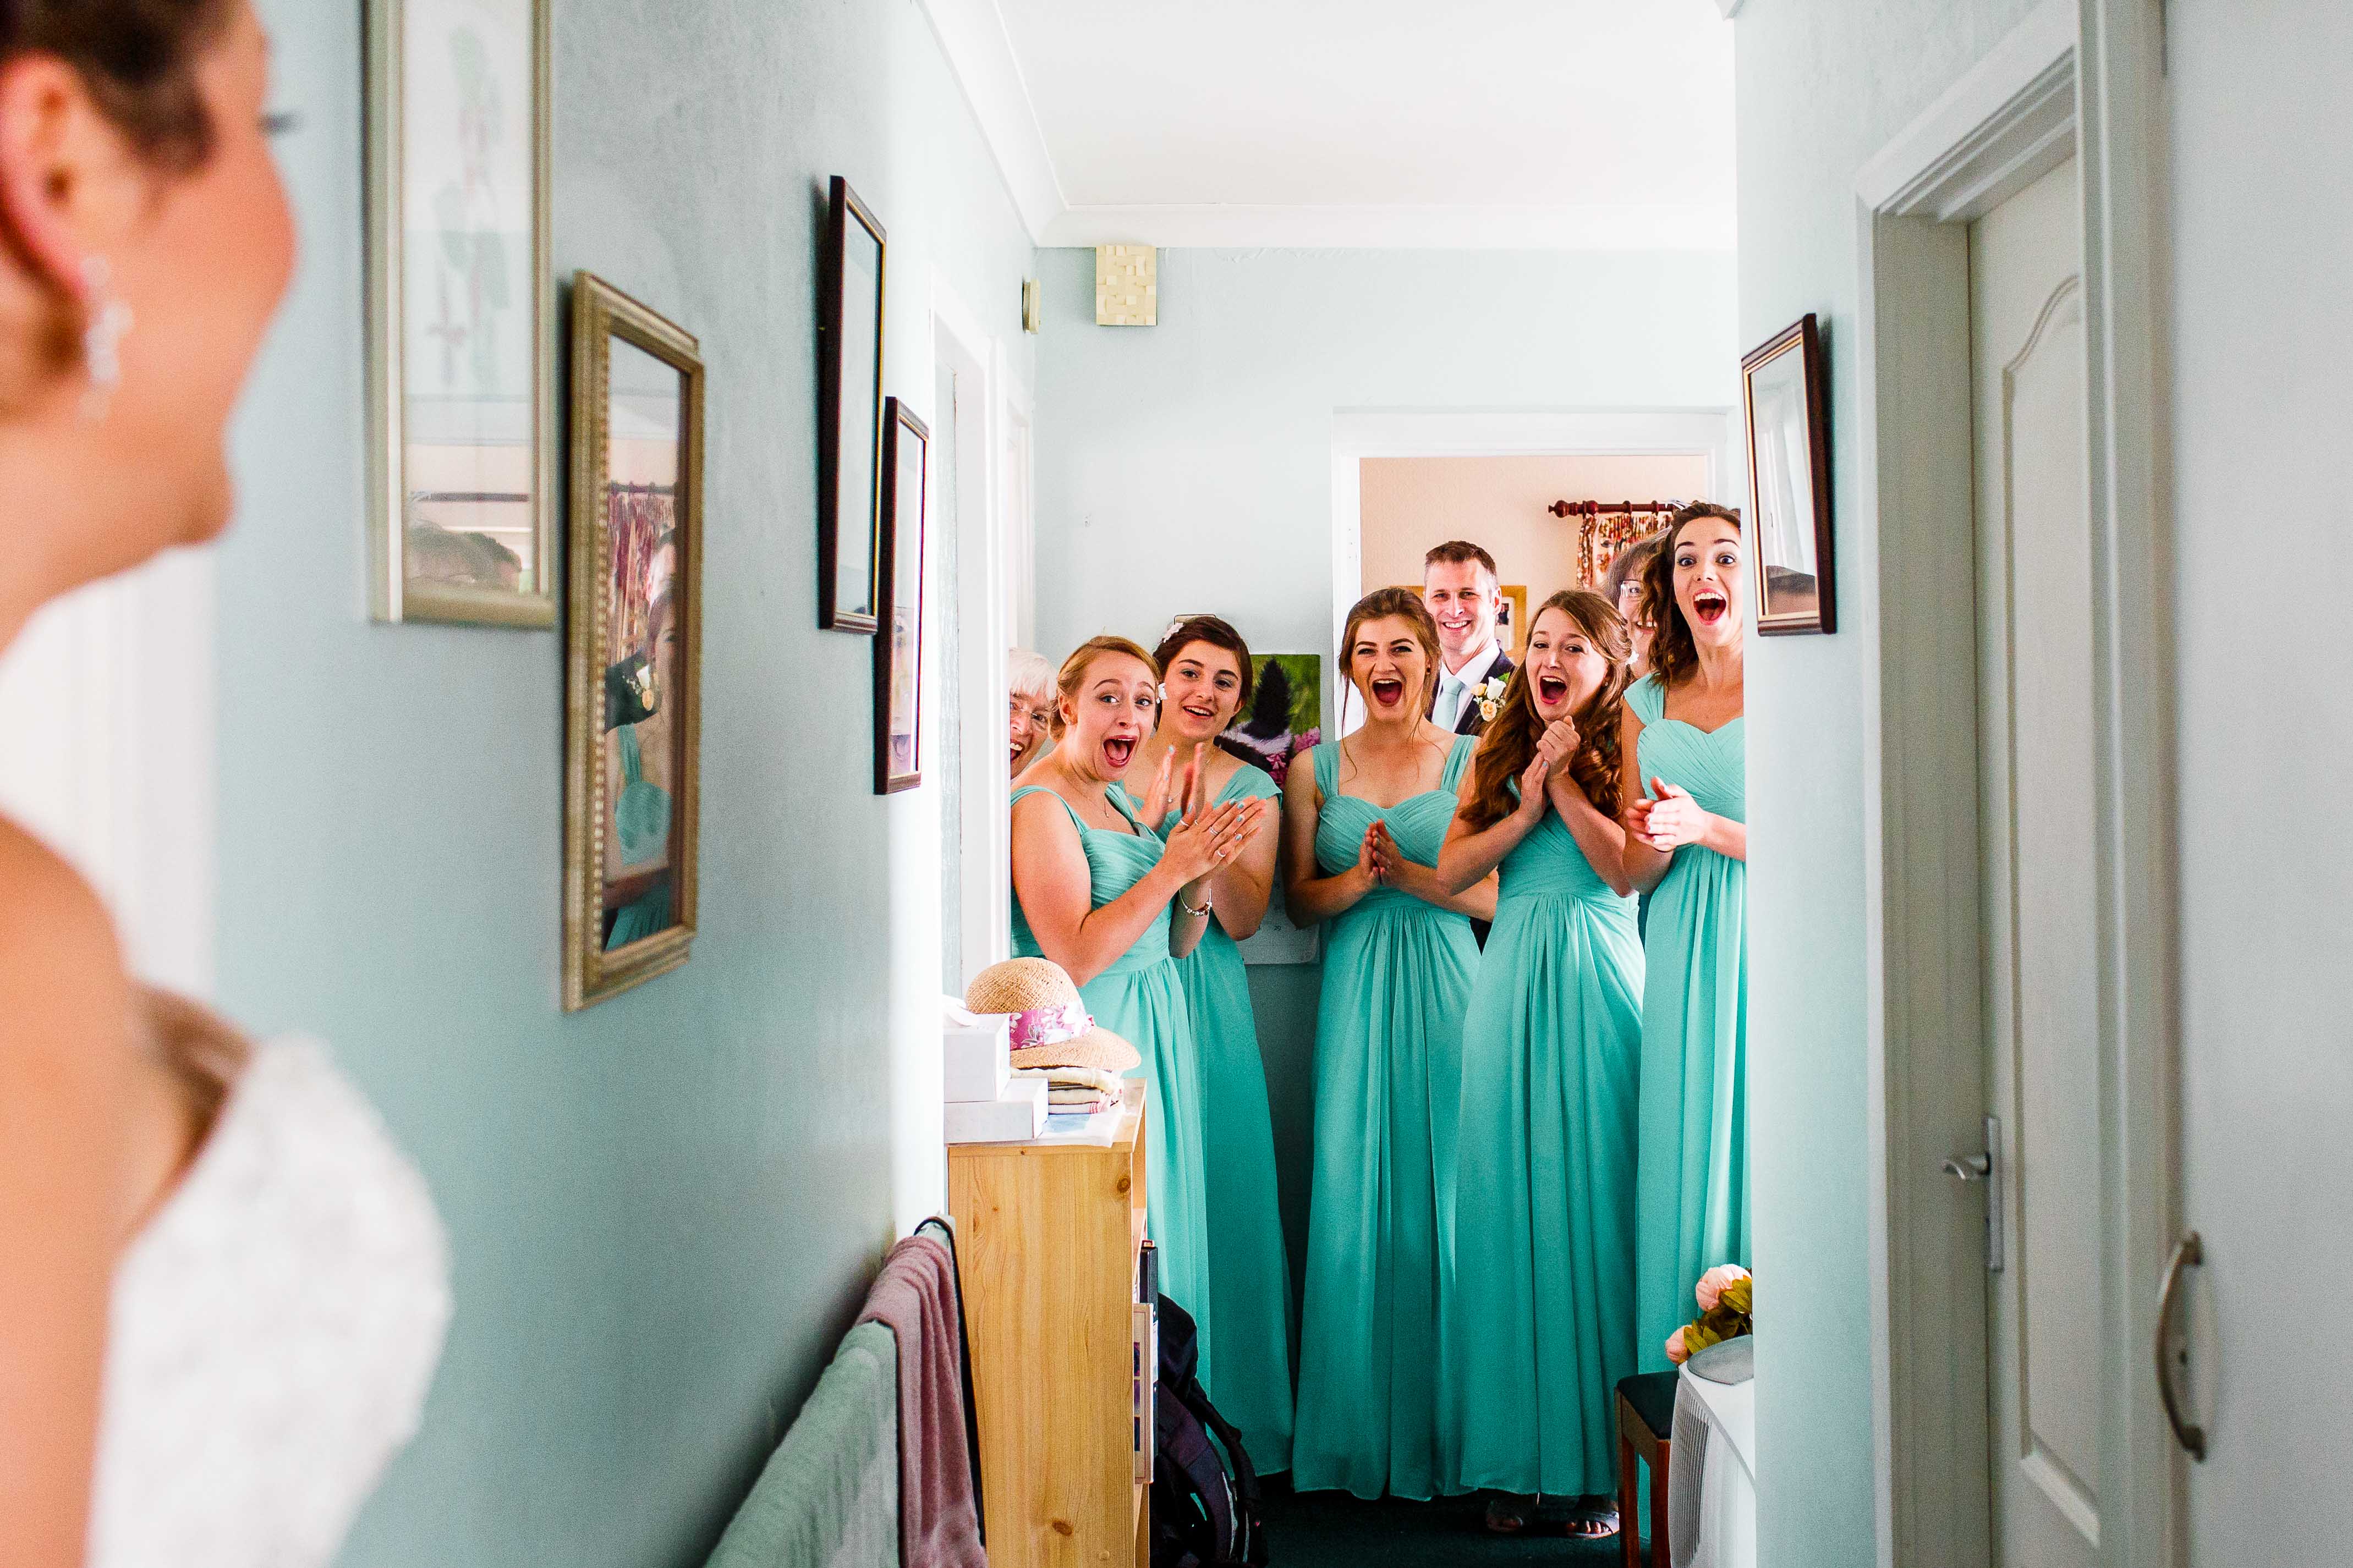 Bridesmaids get really excited when they see the bride for the first time on the wedding day.